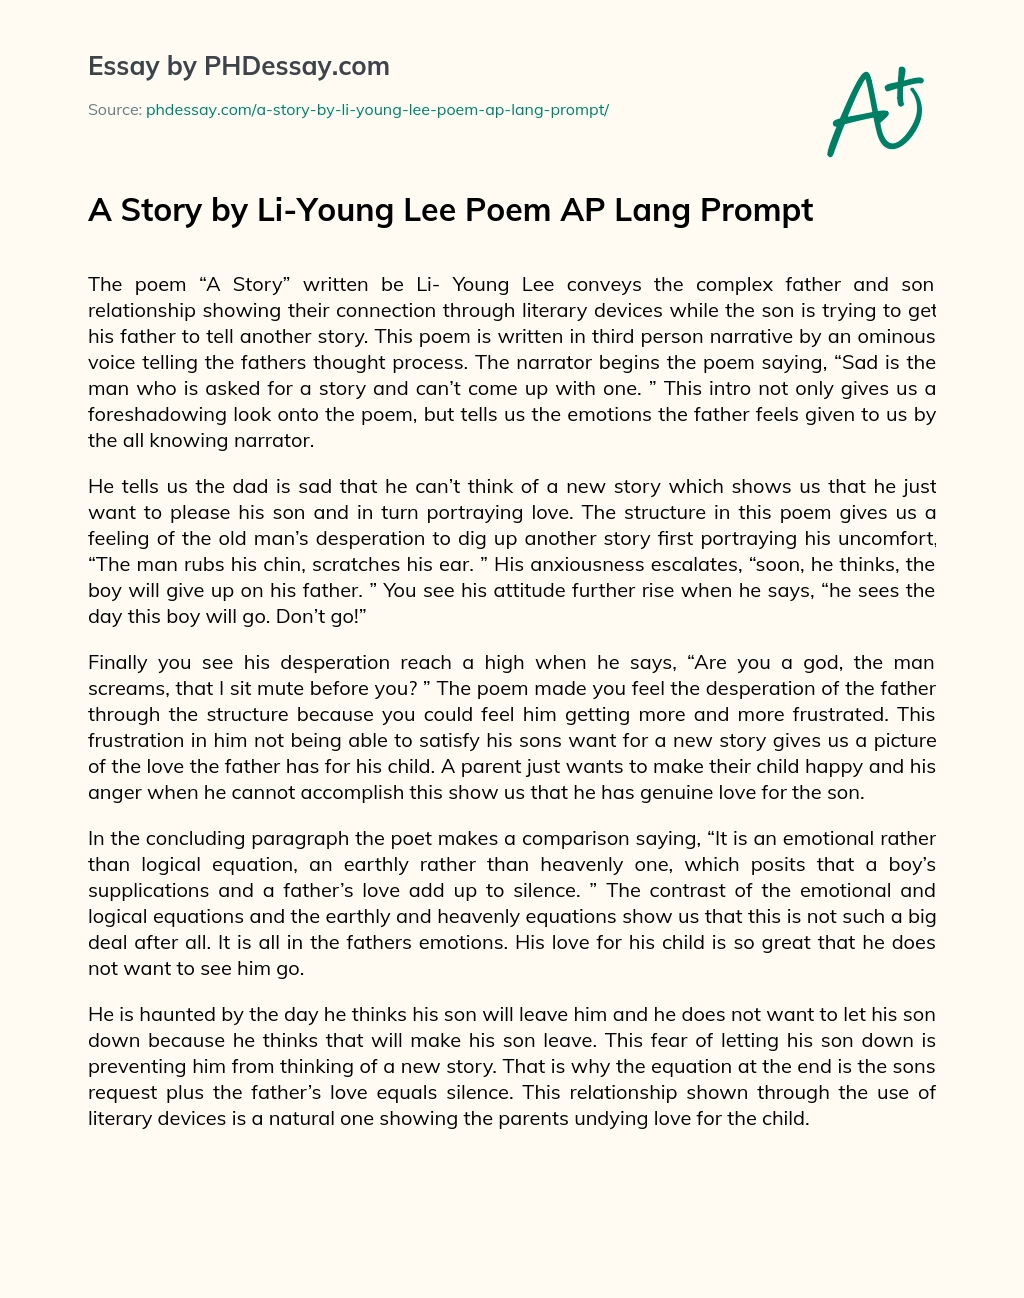 A Story by Li-Young Lee Poem AP Lang Prompt essay